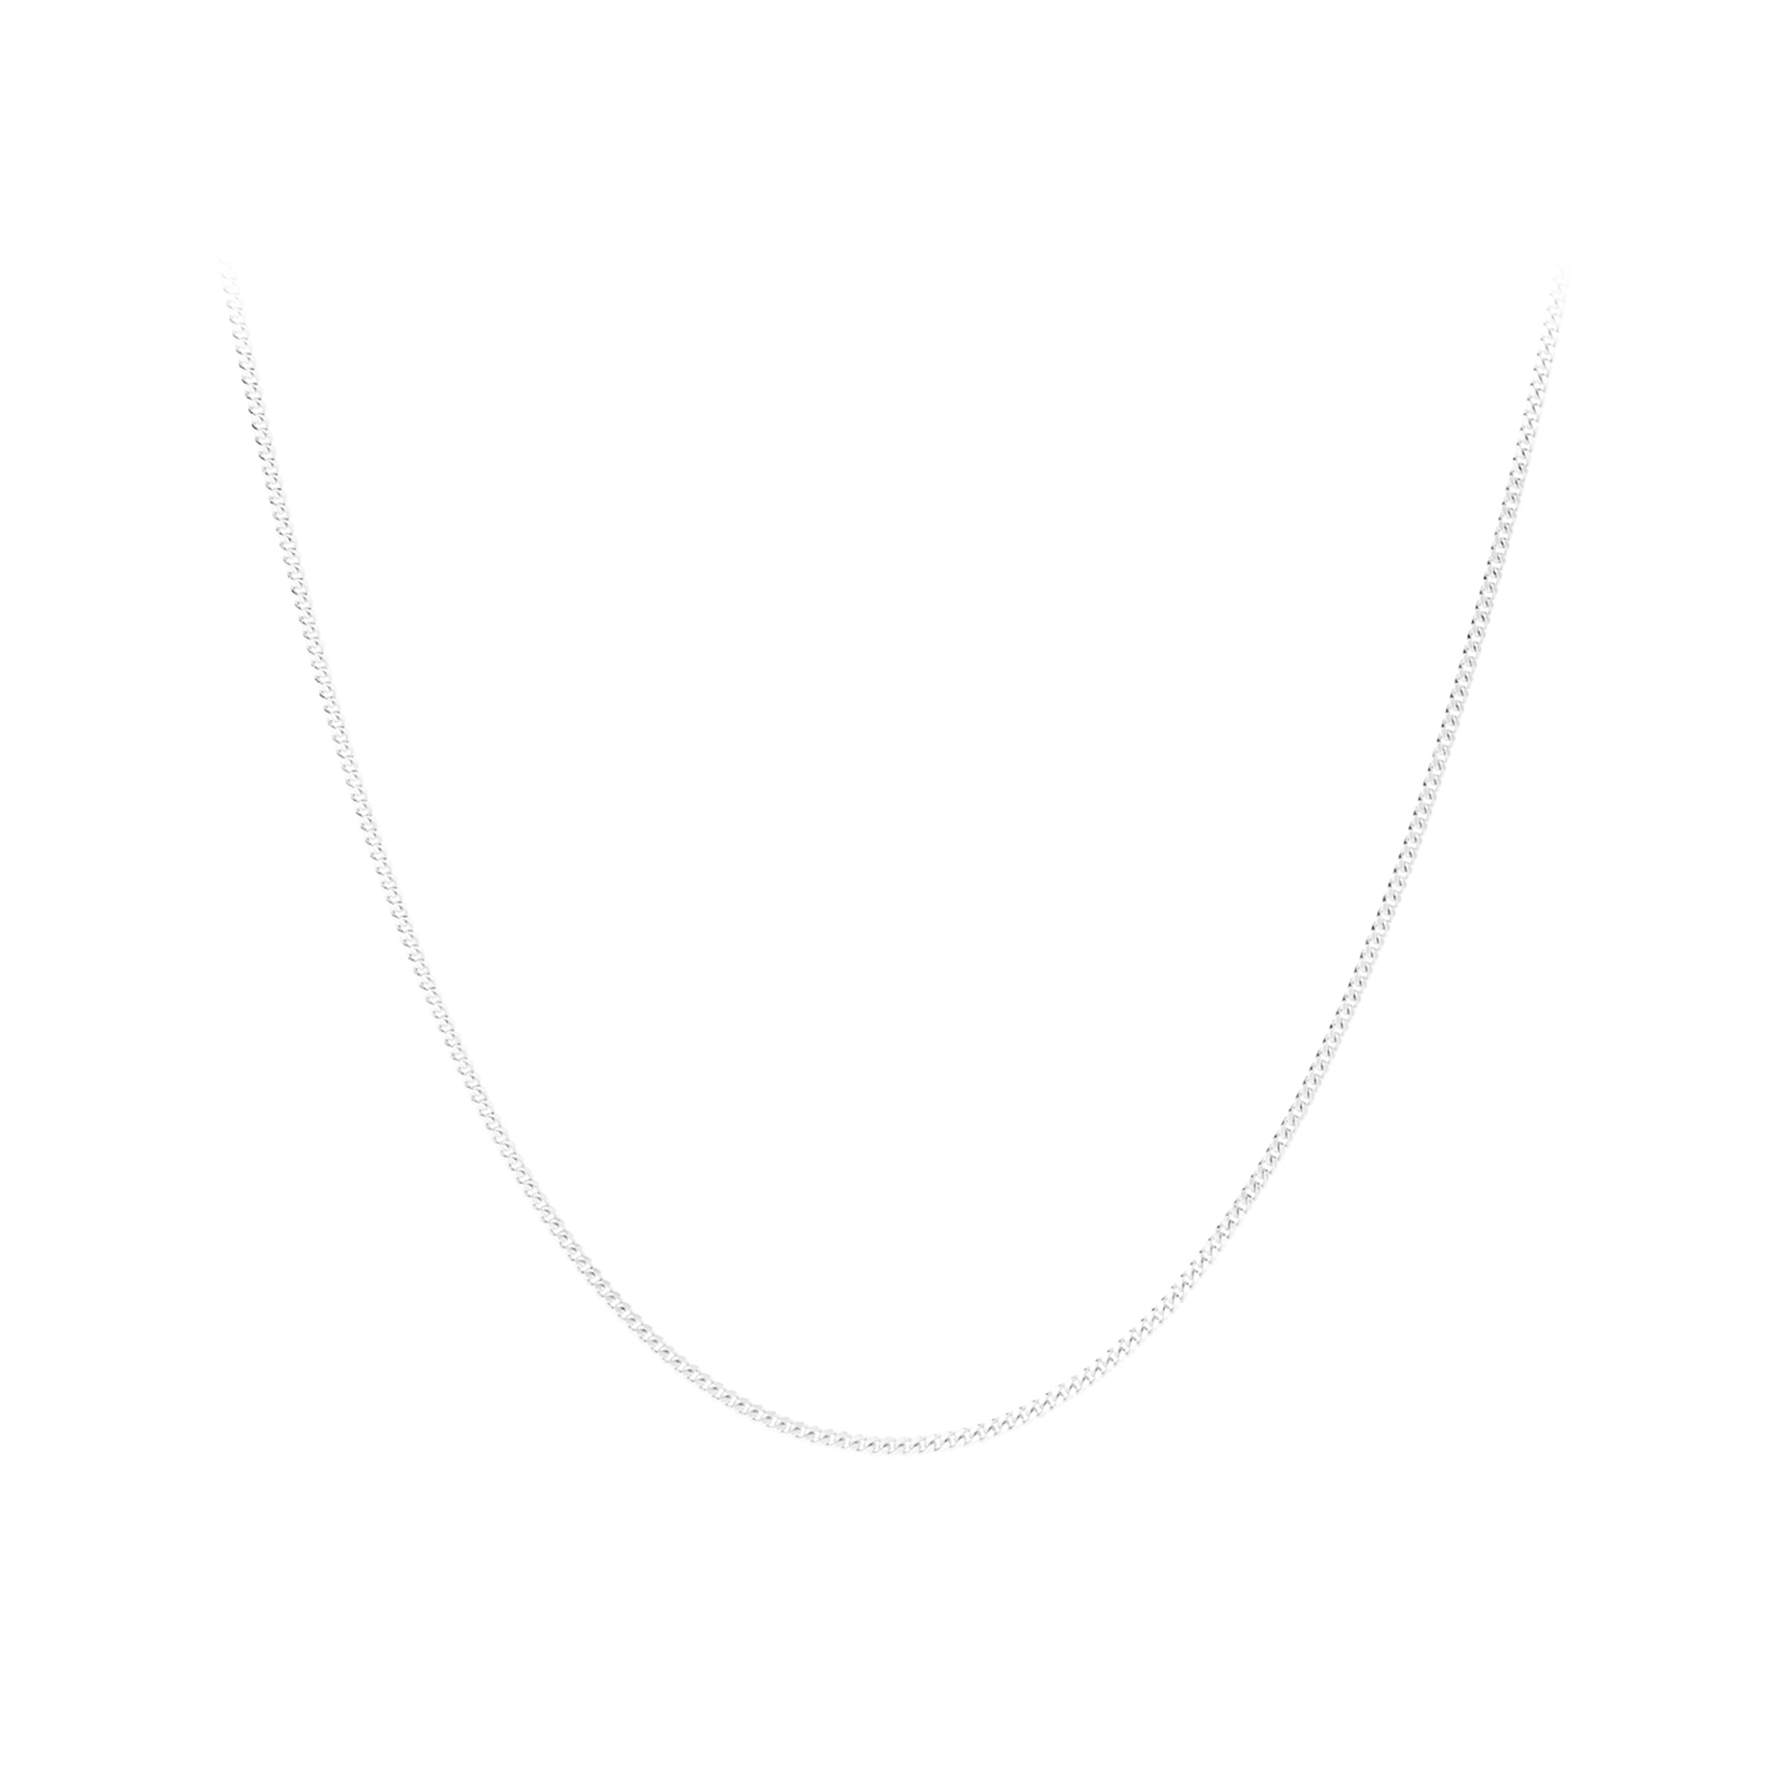 Ea Necklace from Pernille Corydon in Silver Sterling 925